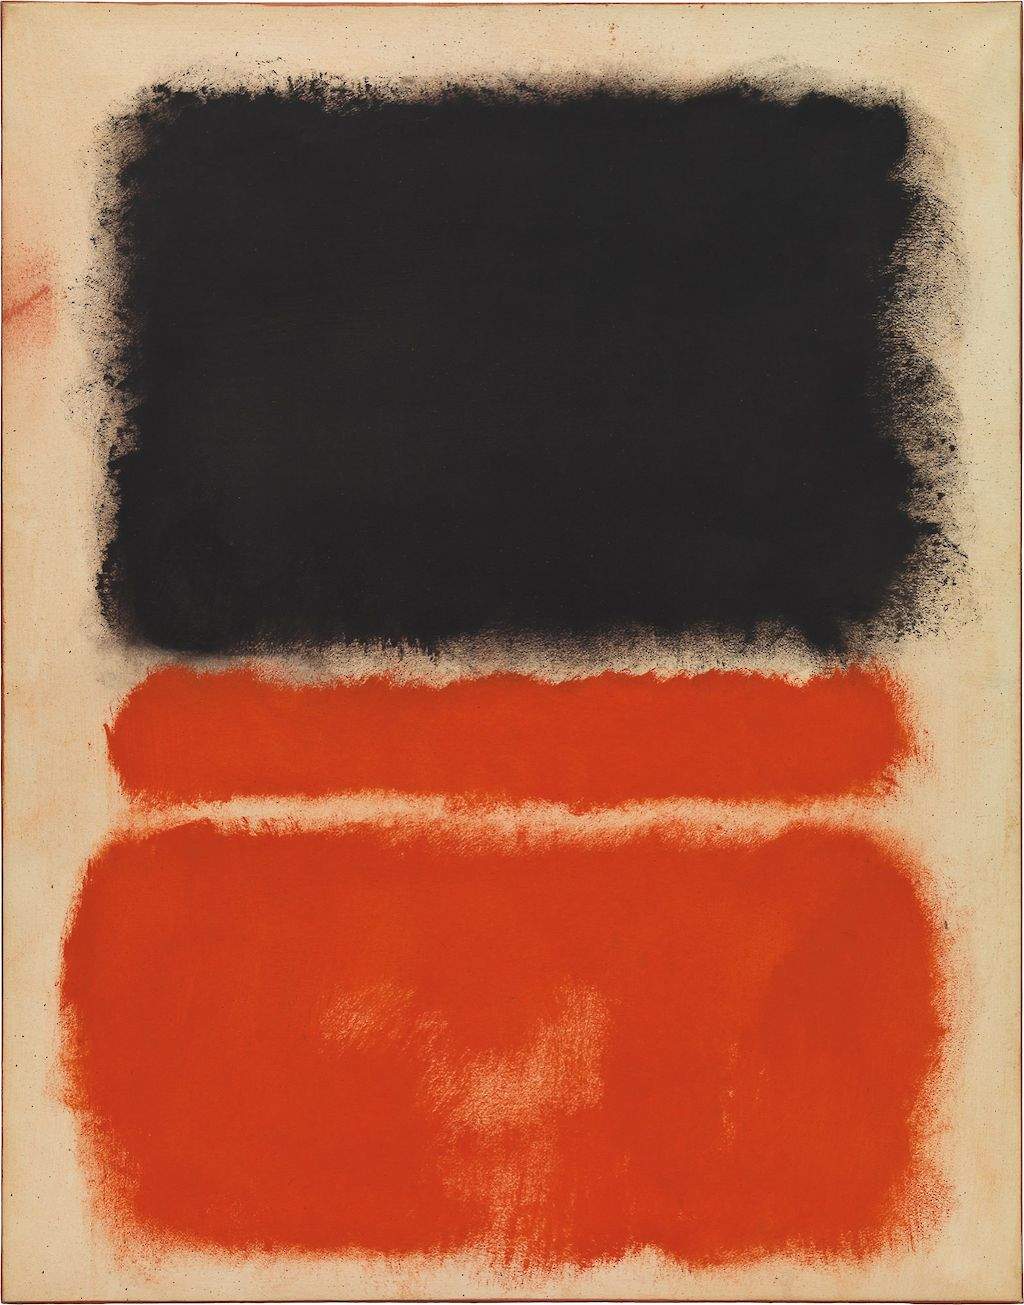 Mark Rothko, life and works of the most intimate abstract expressionist